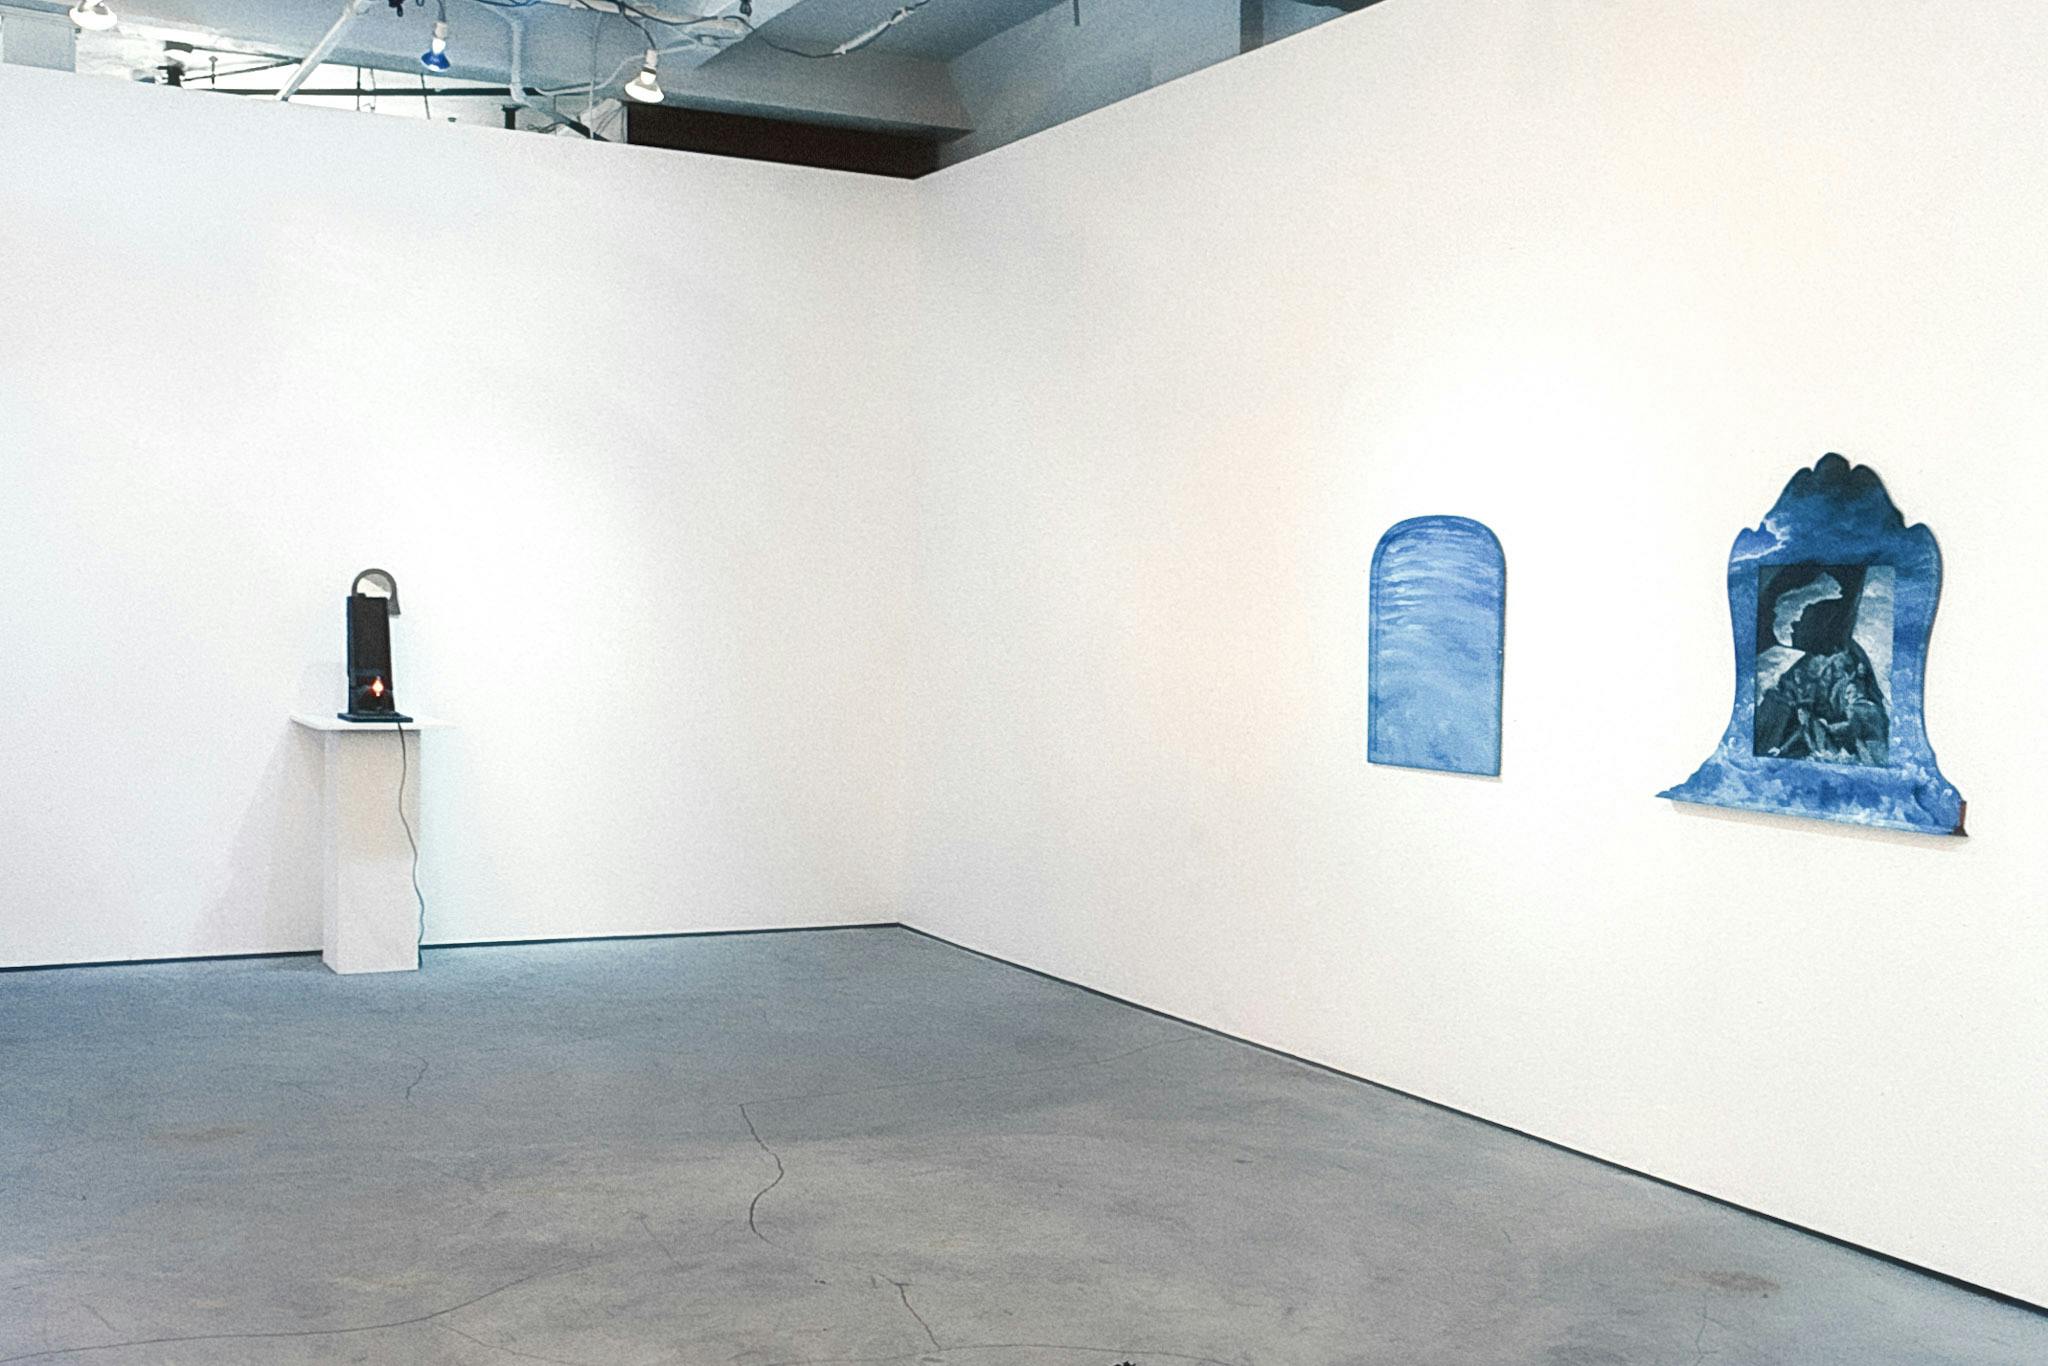 Three artworks in the corner of a gallery space. On one wall there are two small framed works that are painted as cloudy skies. On the other wall there is a small lightbulb in a box on a plinth. 